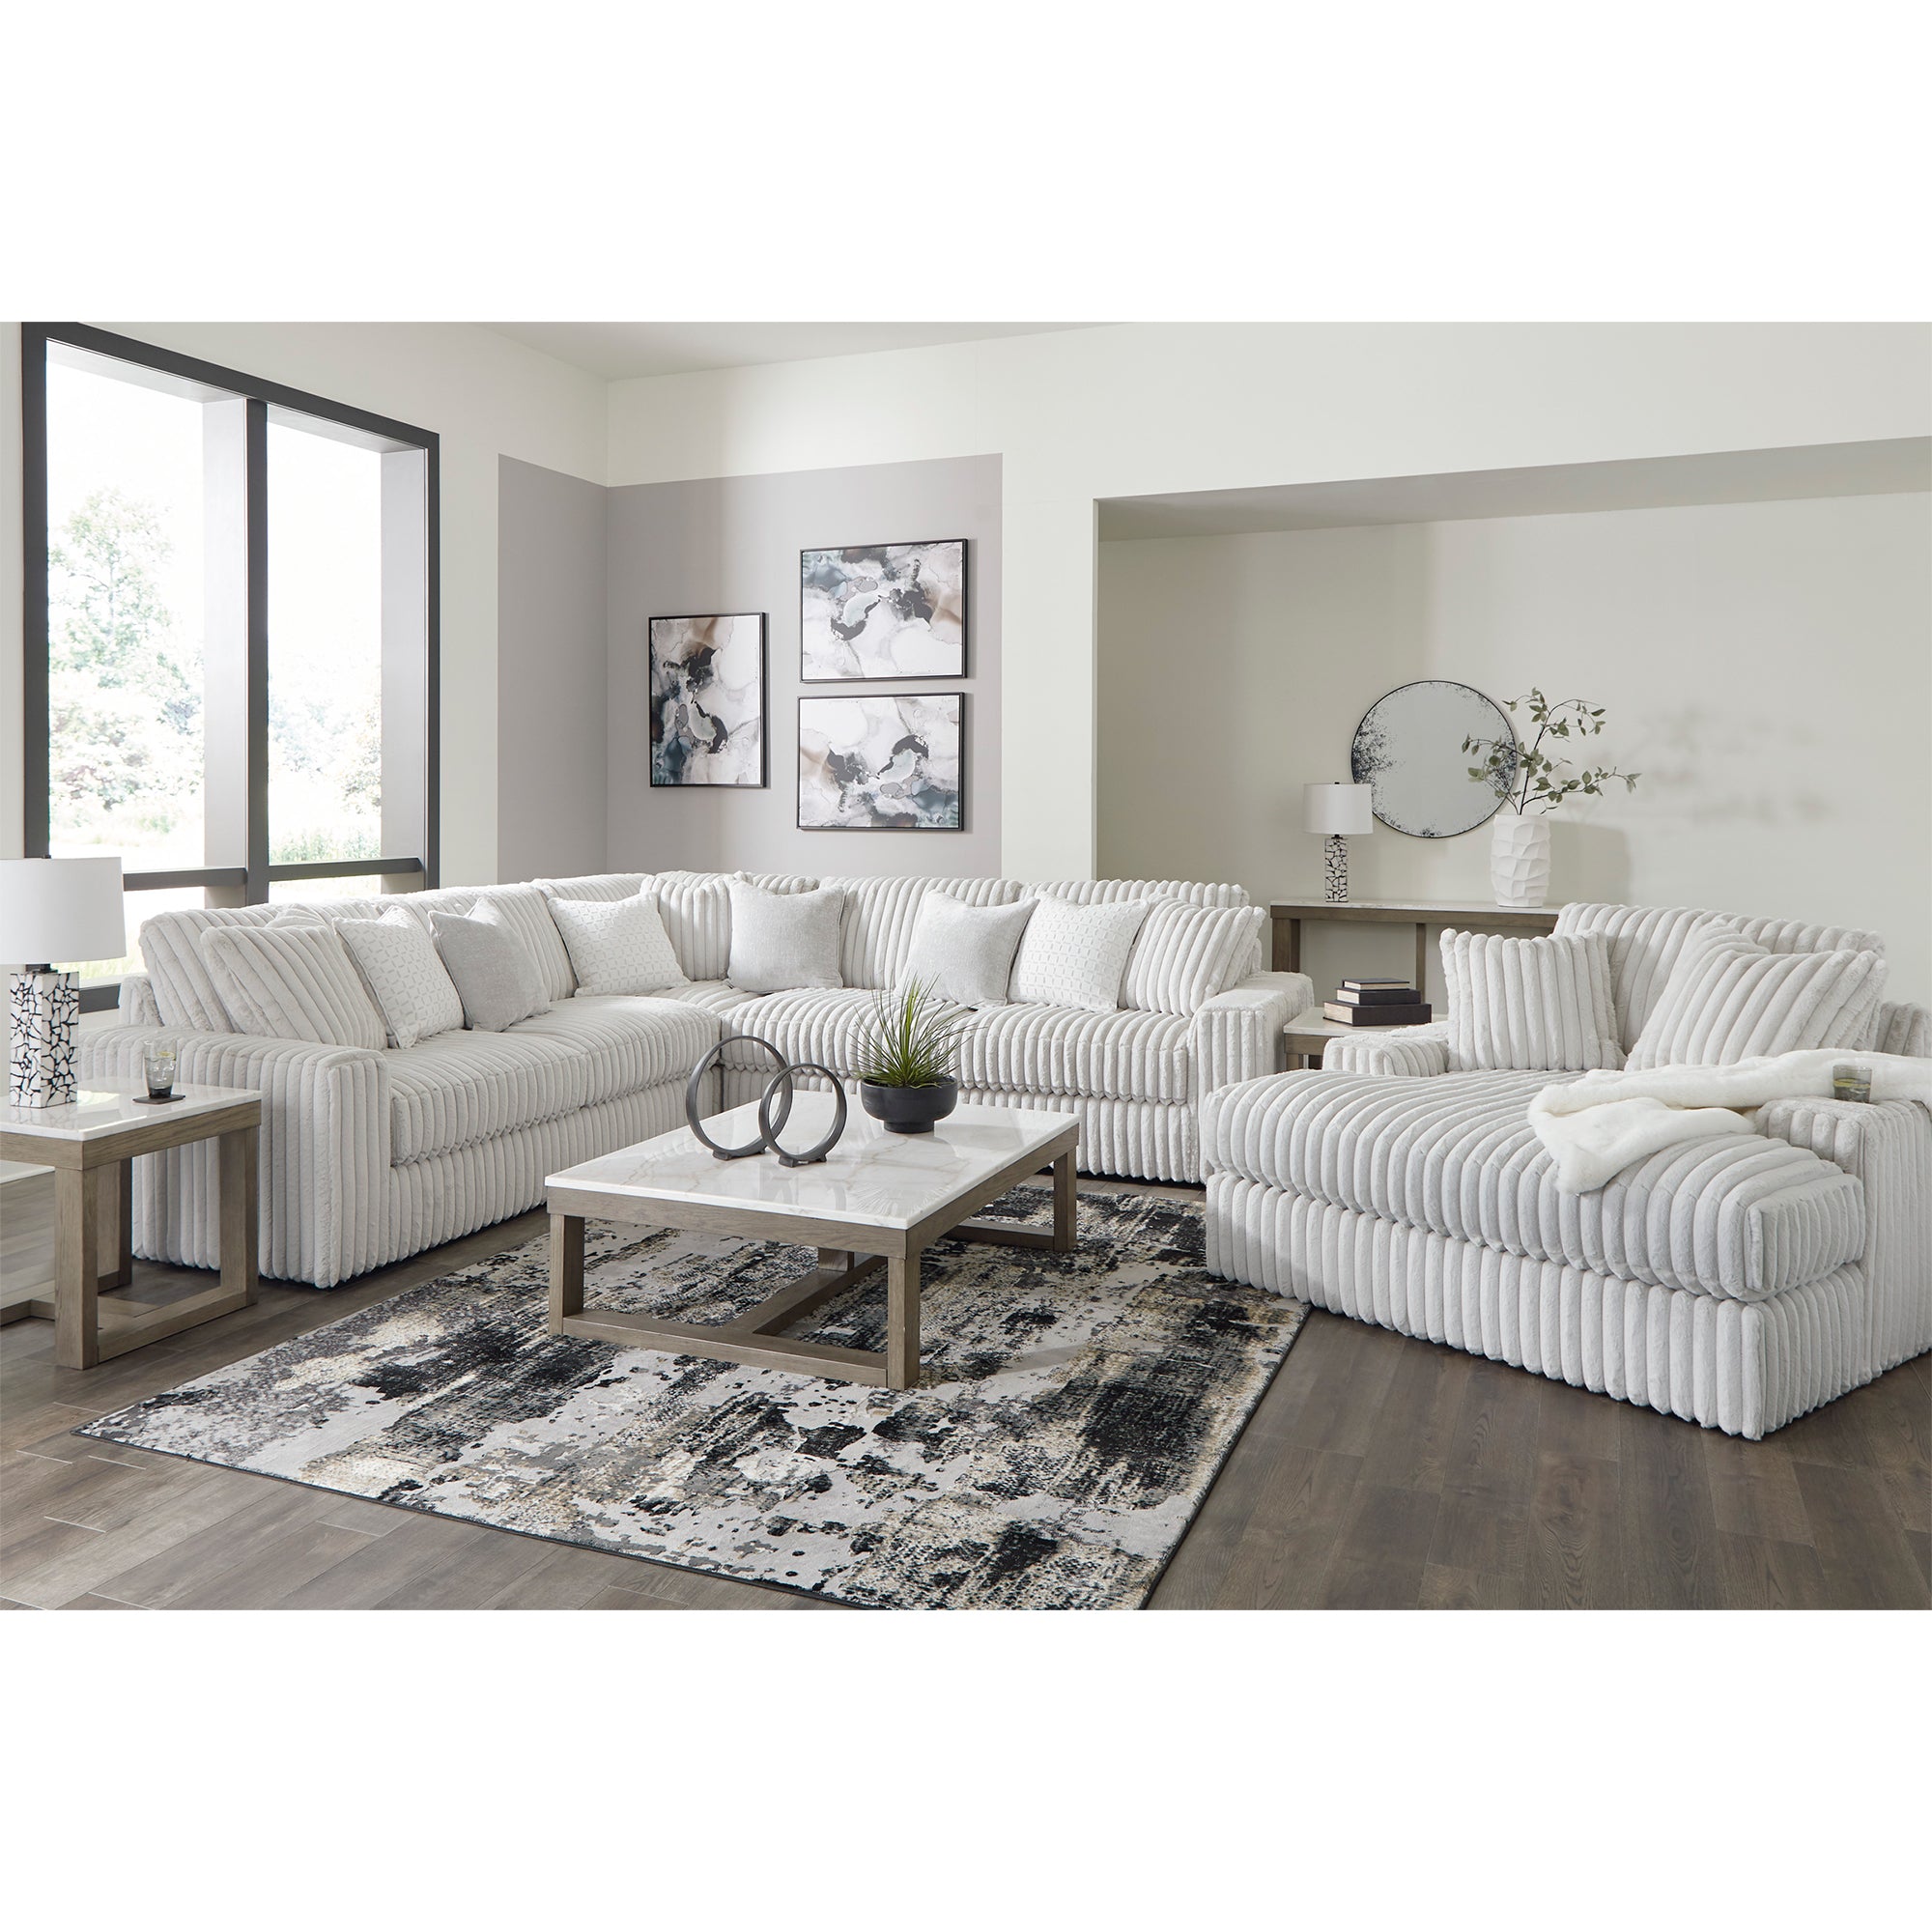 Stupendous Sectional featuring three pieces for flexible layout options in your home, enhanced with a smooth and supportive foundation